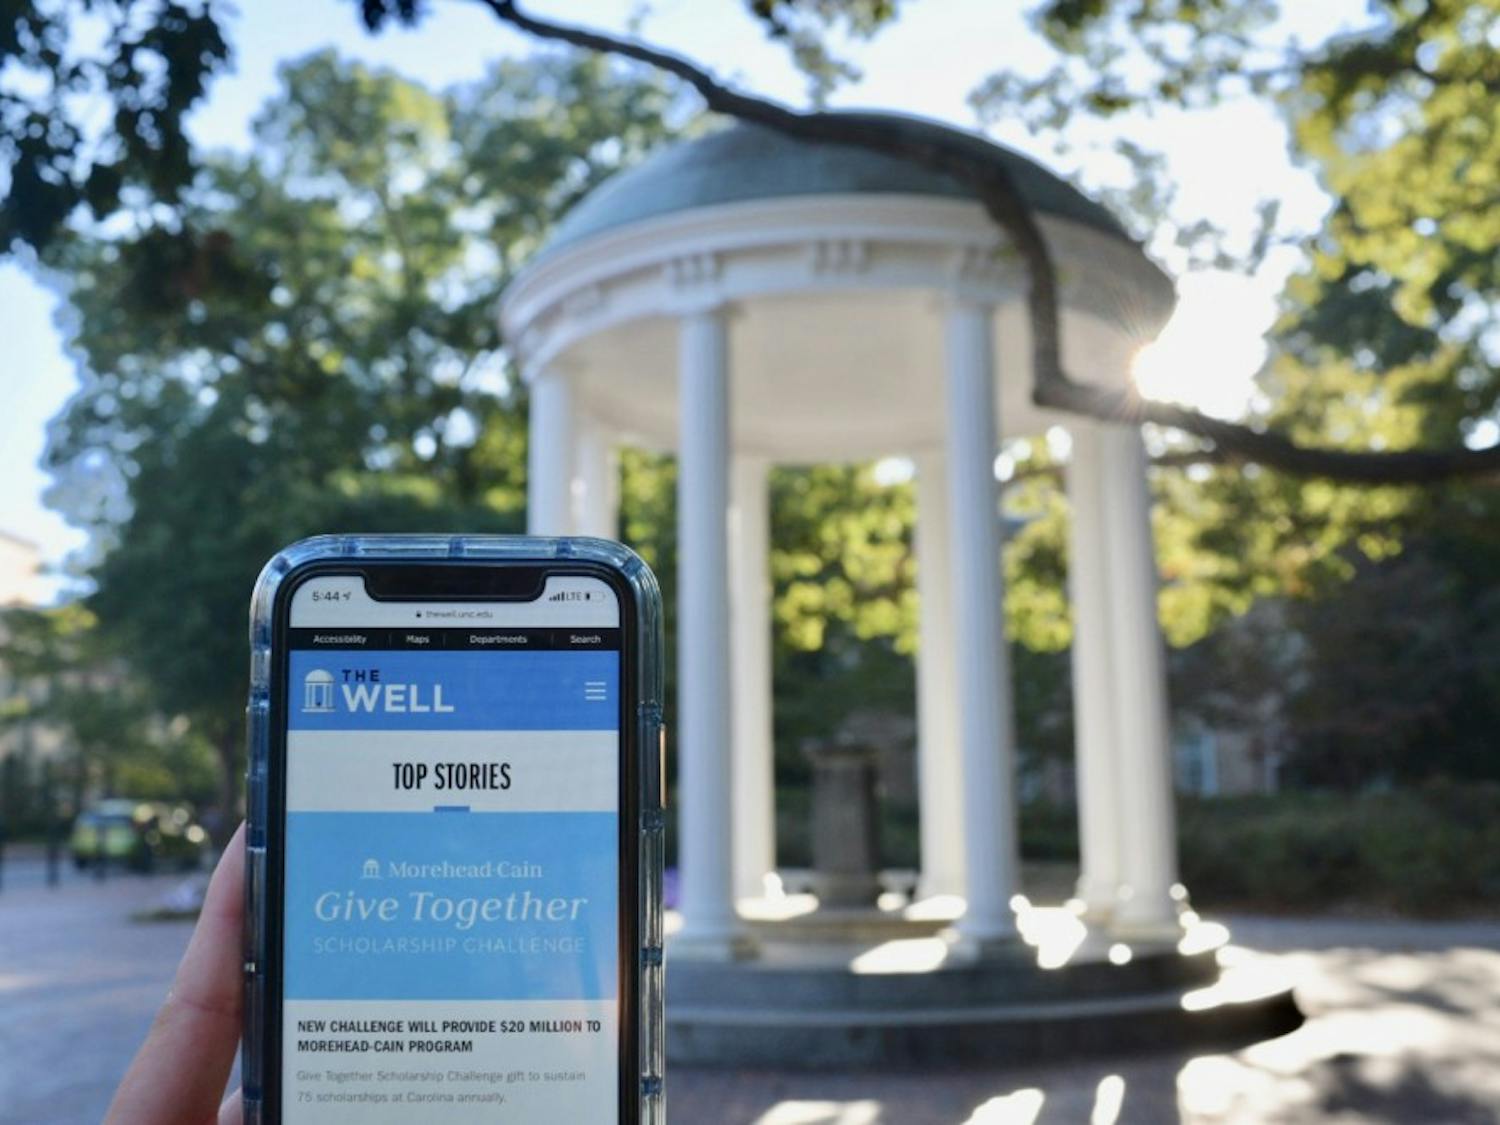 UNC Faculty and Staff are now able to look at campus wide events and news through a new app introduced to them called "The Well." This will make it easier for employees to navigate what is going on at UNC on Tuesday, September 24th, 2019. "